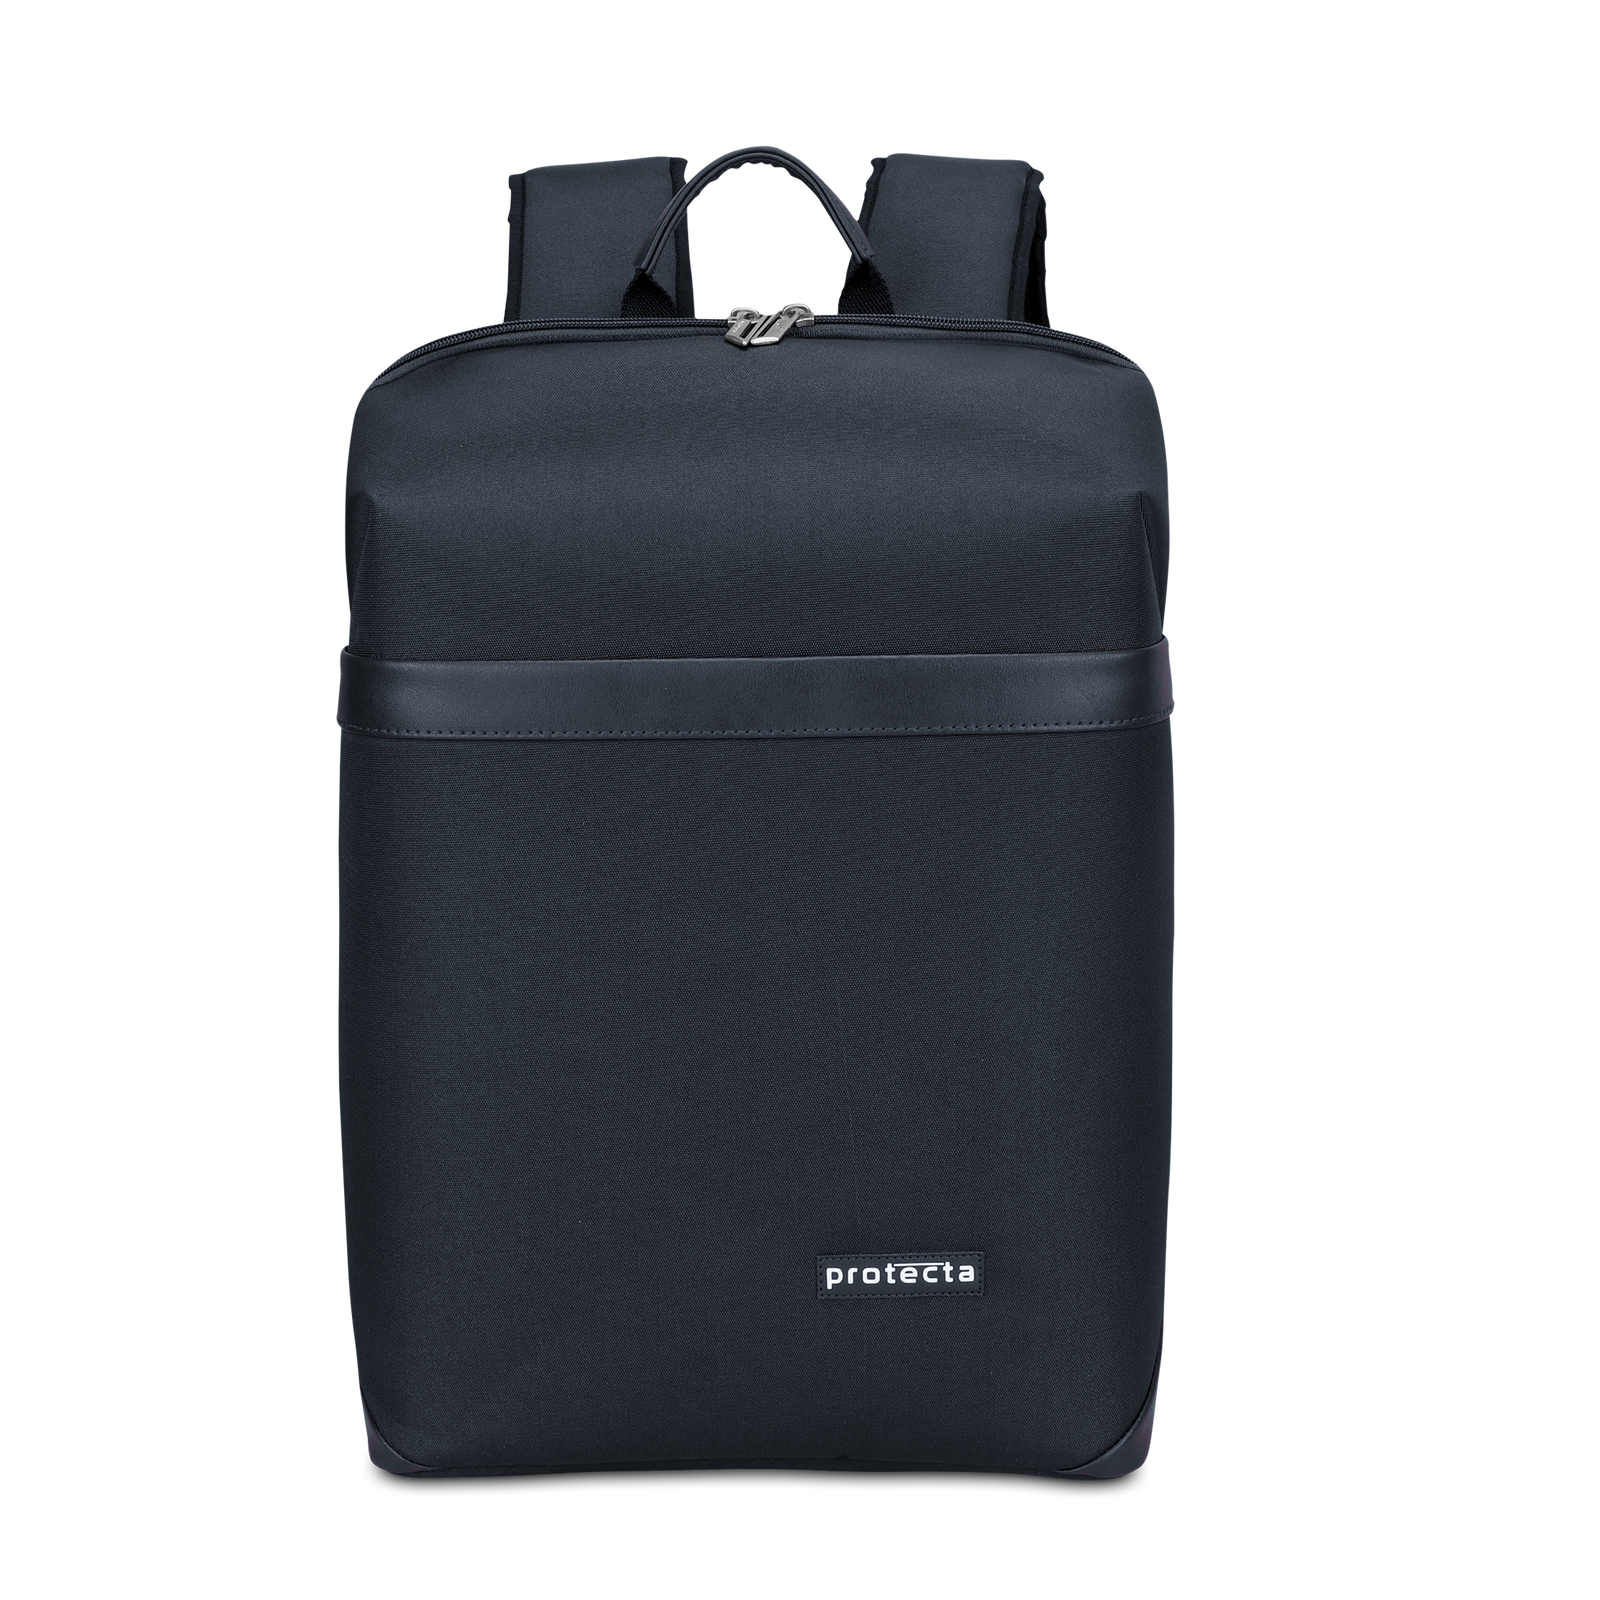 Black | Protecta Early Lead Anti-Theft Office Laptop Backpack - Main